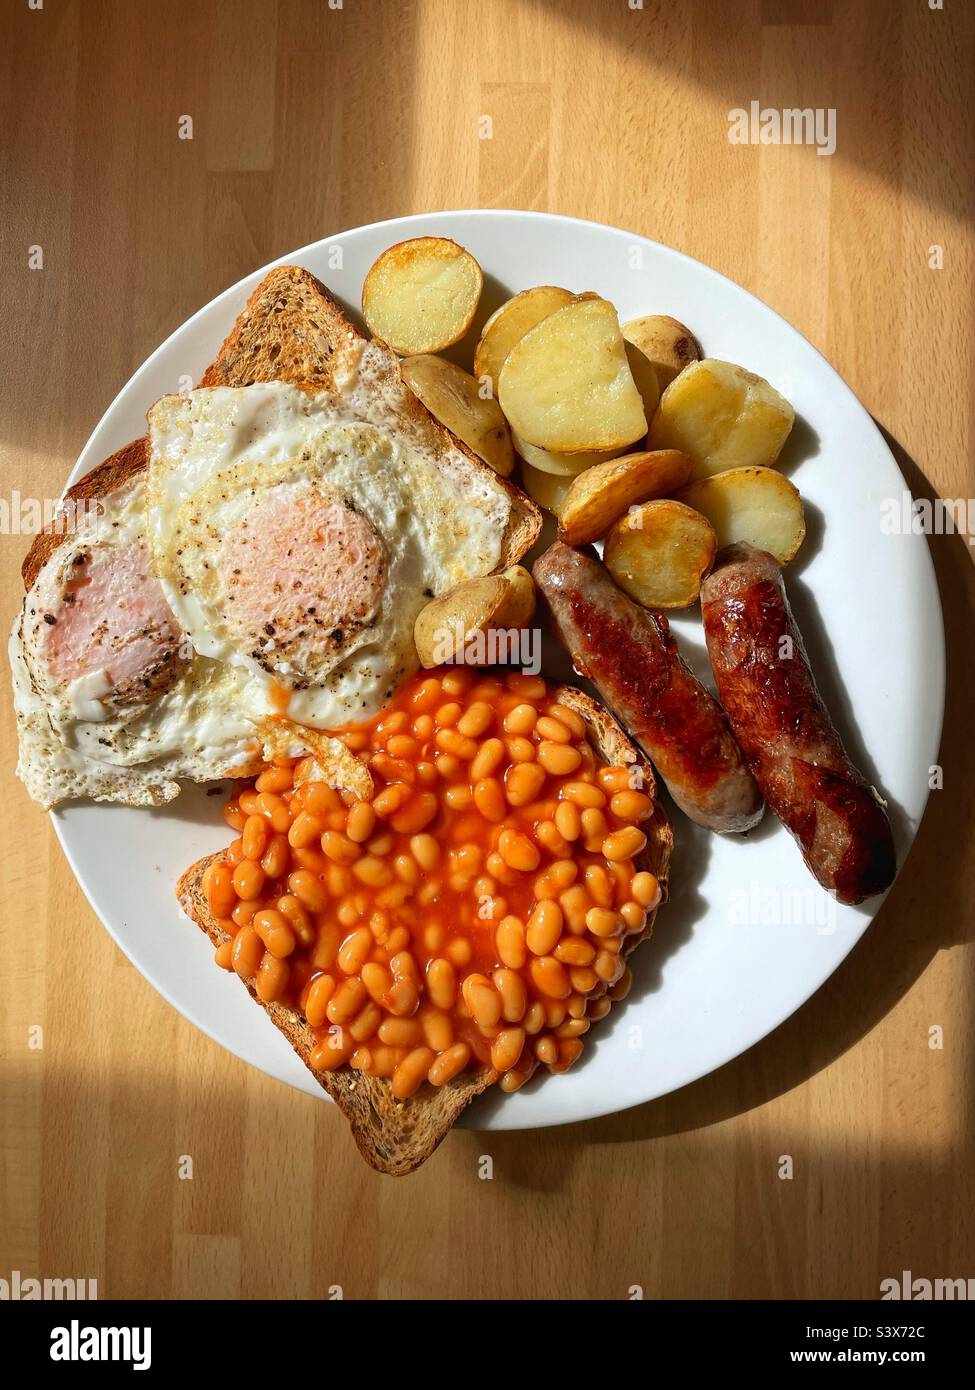 Brunch / breakfast food. Fried eggs, potatoes, beans and sausages. Stock Photo